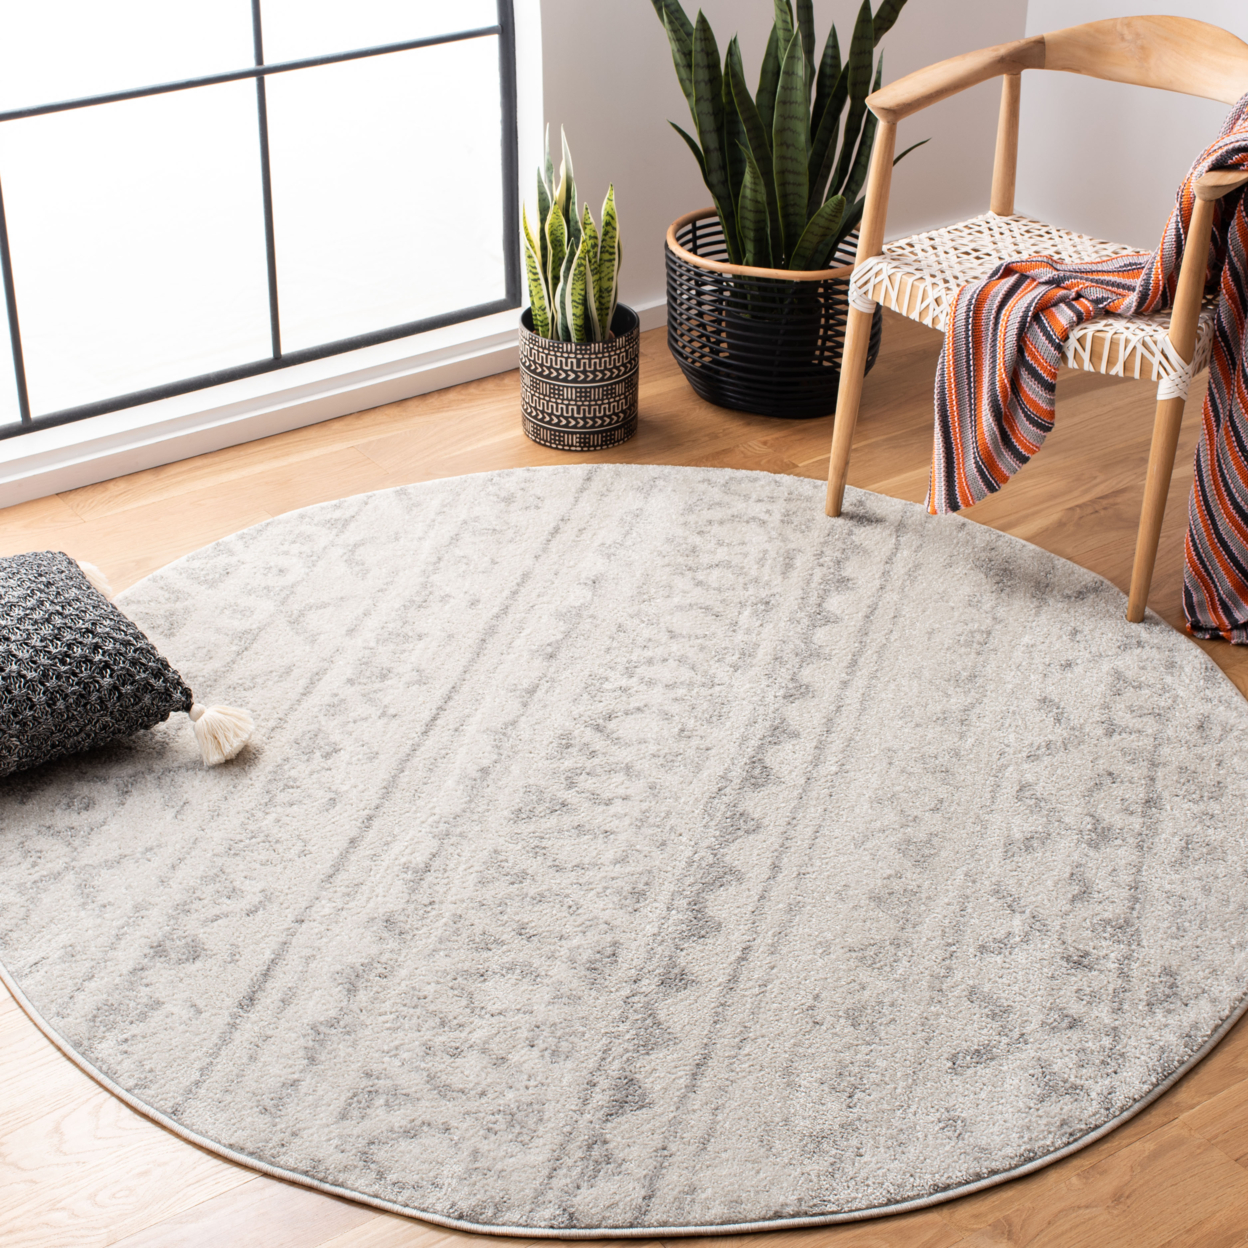 SAFAVIEH Adirondack Collection ADR119A Ivory / Silver Rug - 2' 6 X 8'